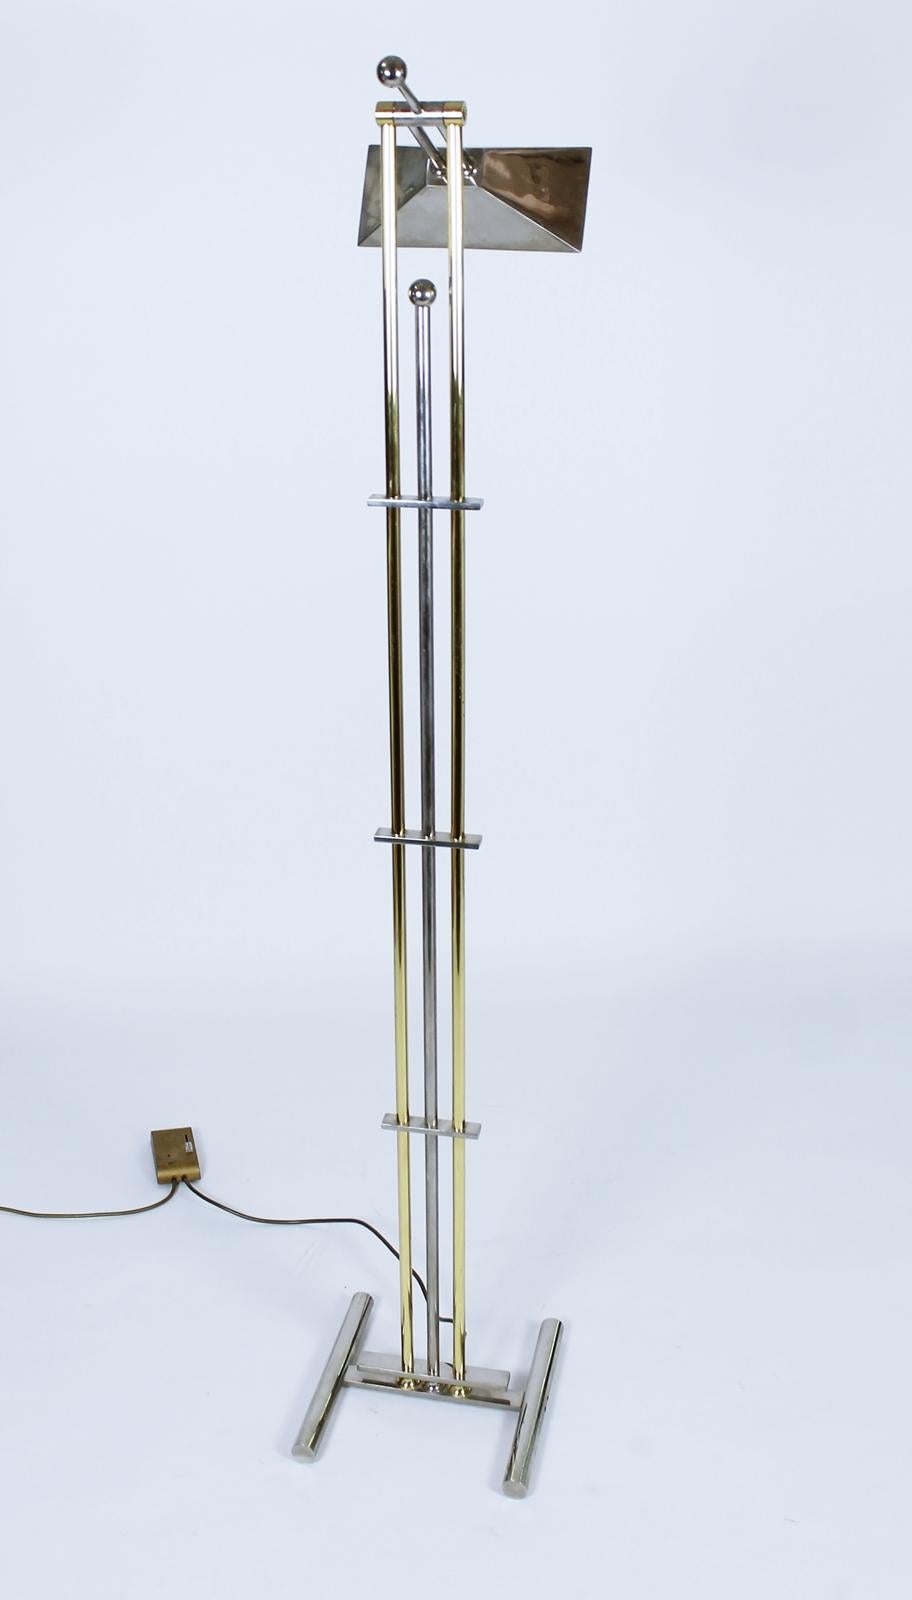 Unique floor lamp designed by Goetz, circa 1970.
 Signed.
 Features a polished chrome adjustable shade with heavy base from chrome and brass rods. 
The on/off switch is a 0-100% dimmer, located on the power cord.